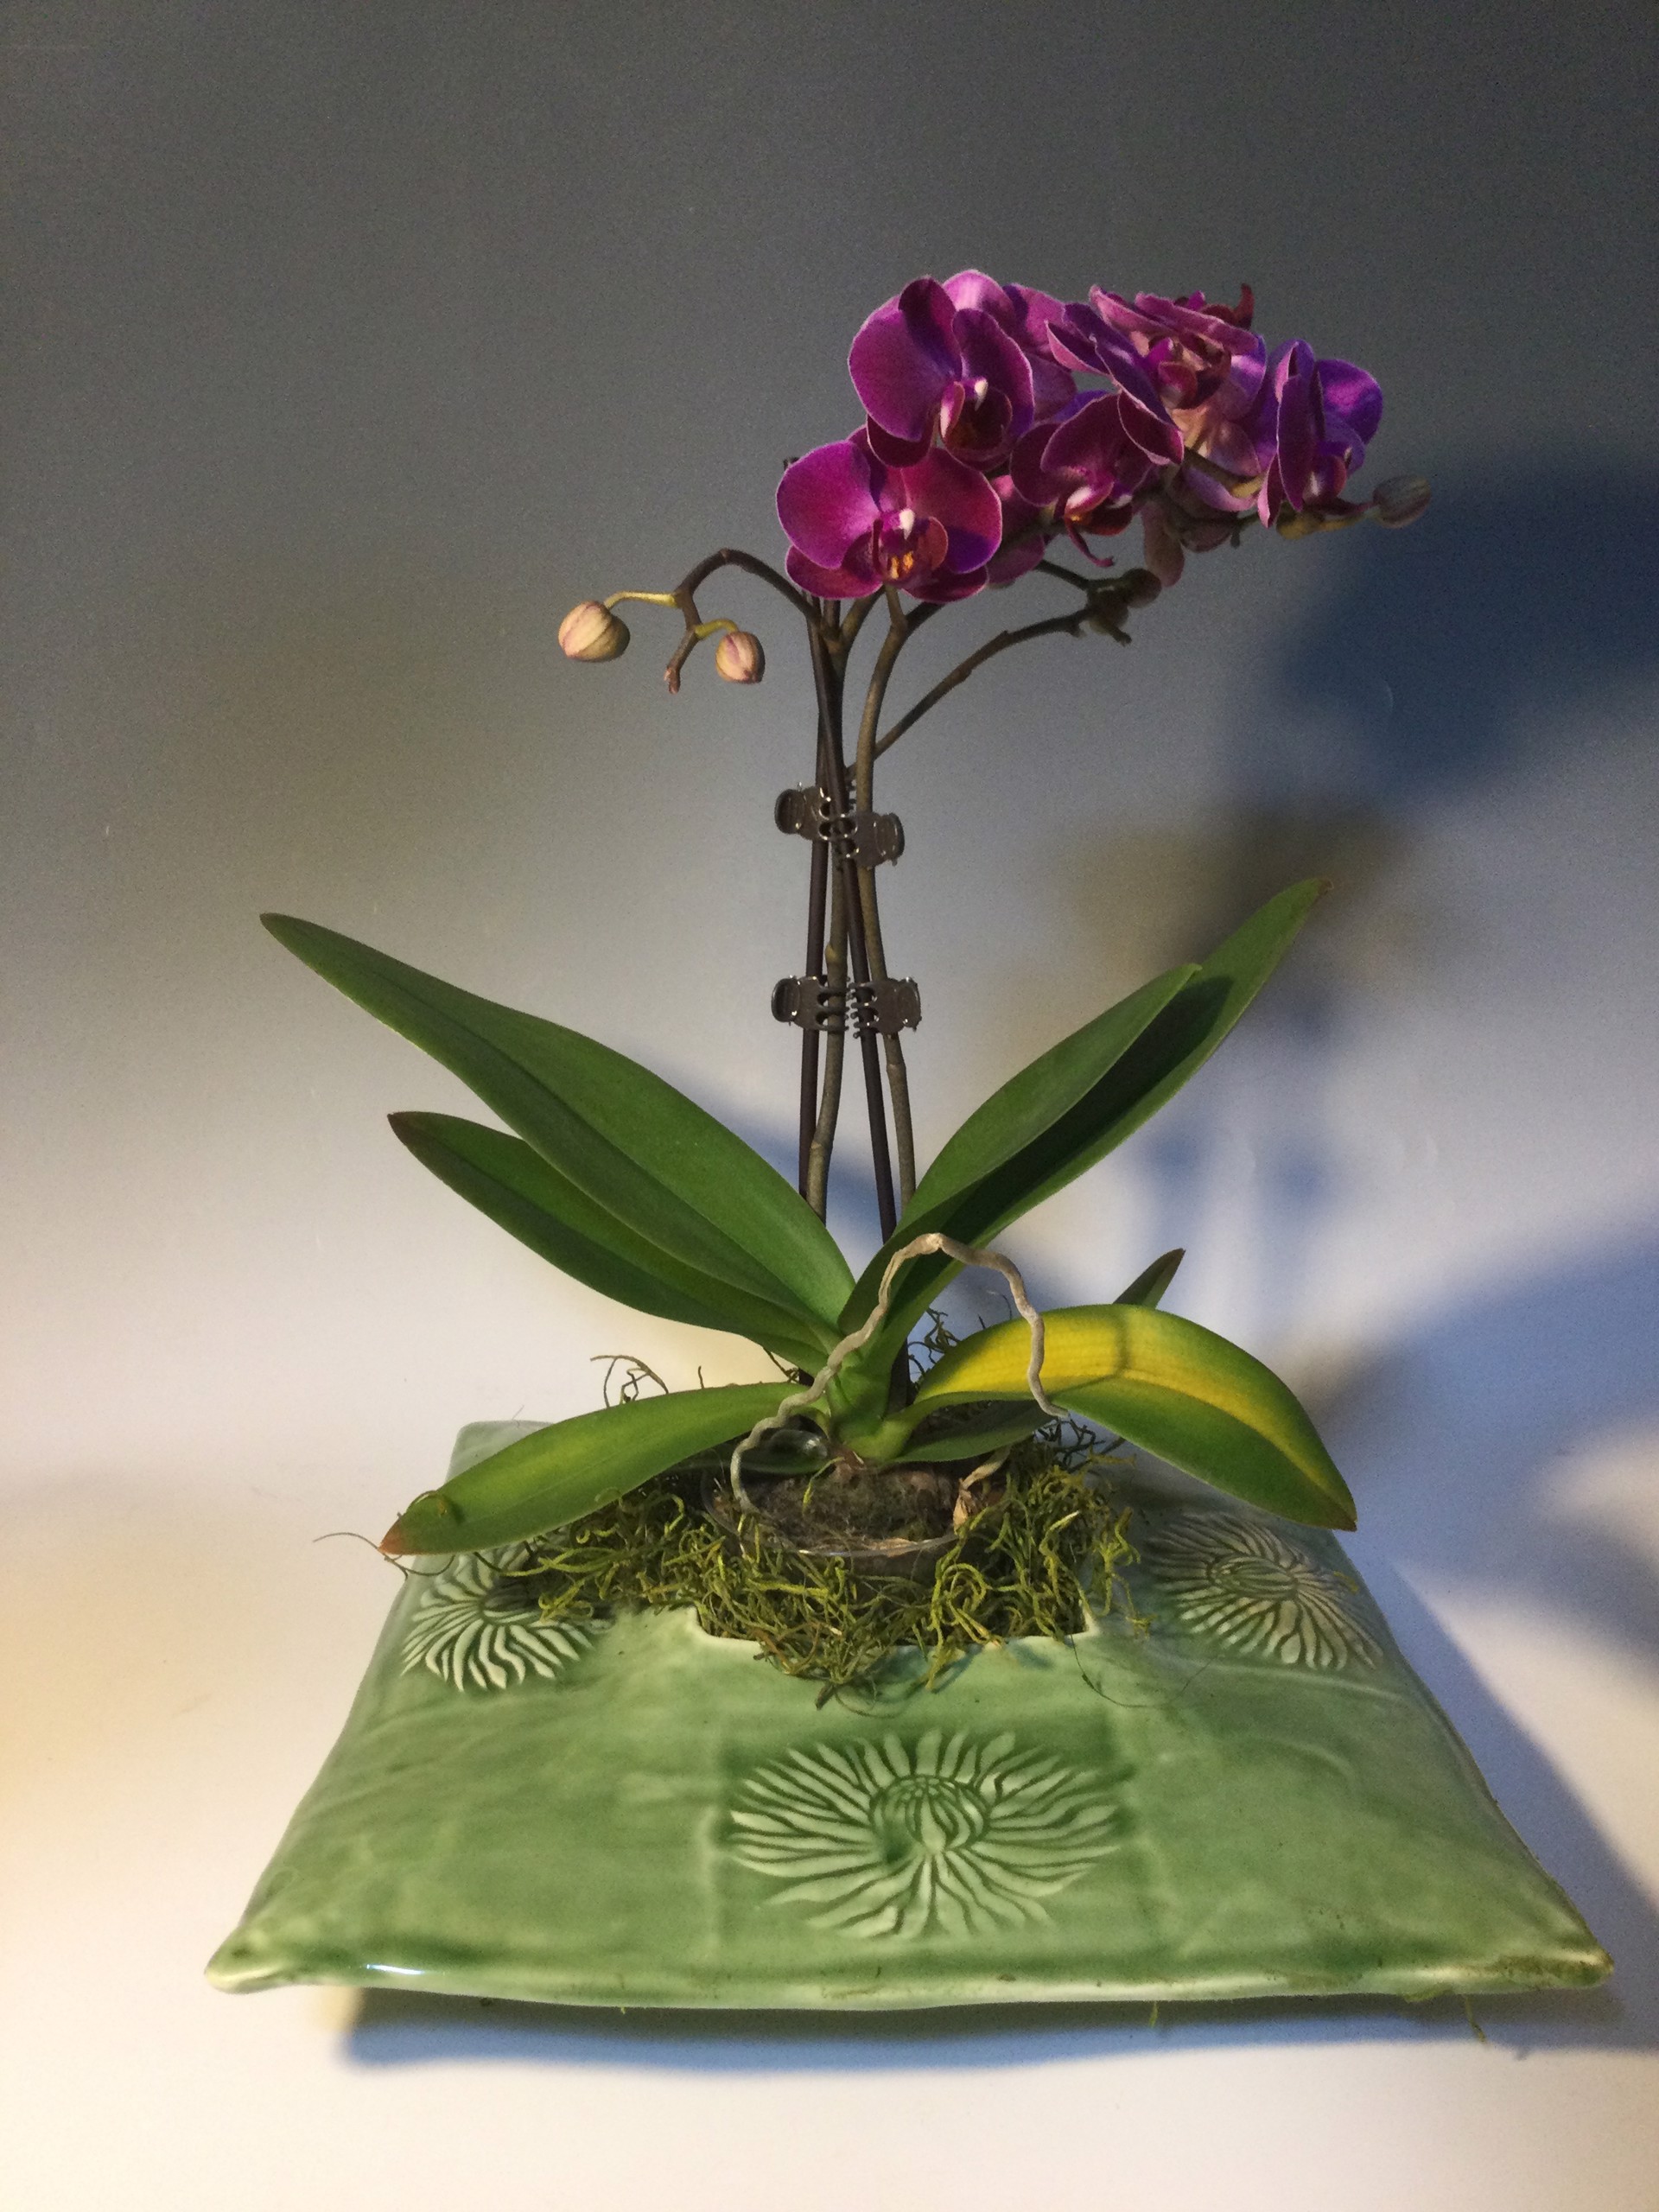 Asian Vessel with Orchid by Anna M. Elrod